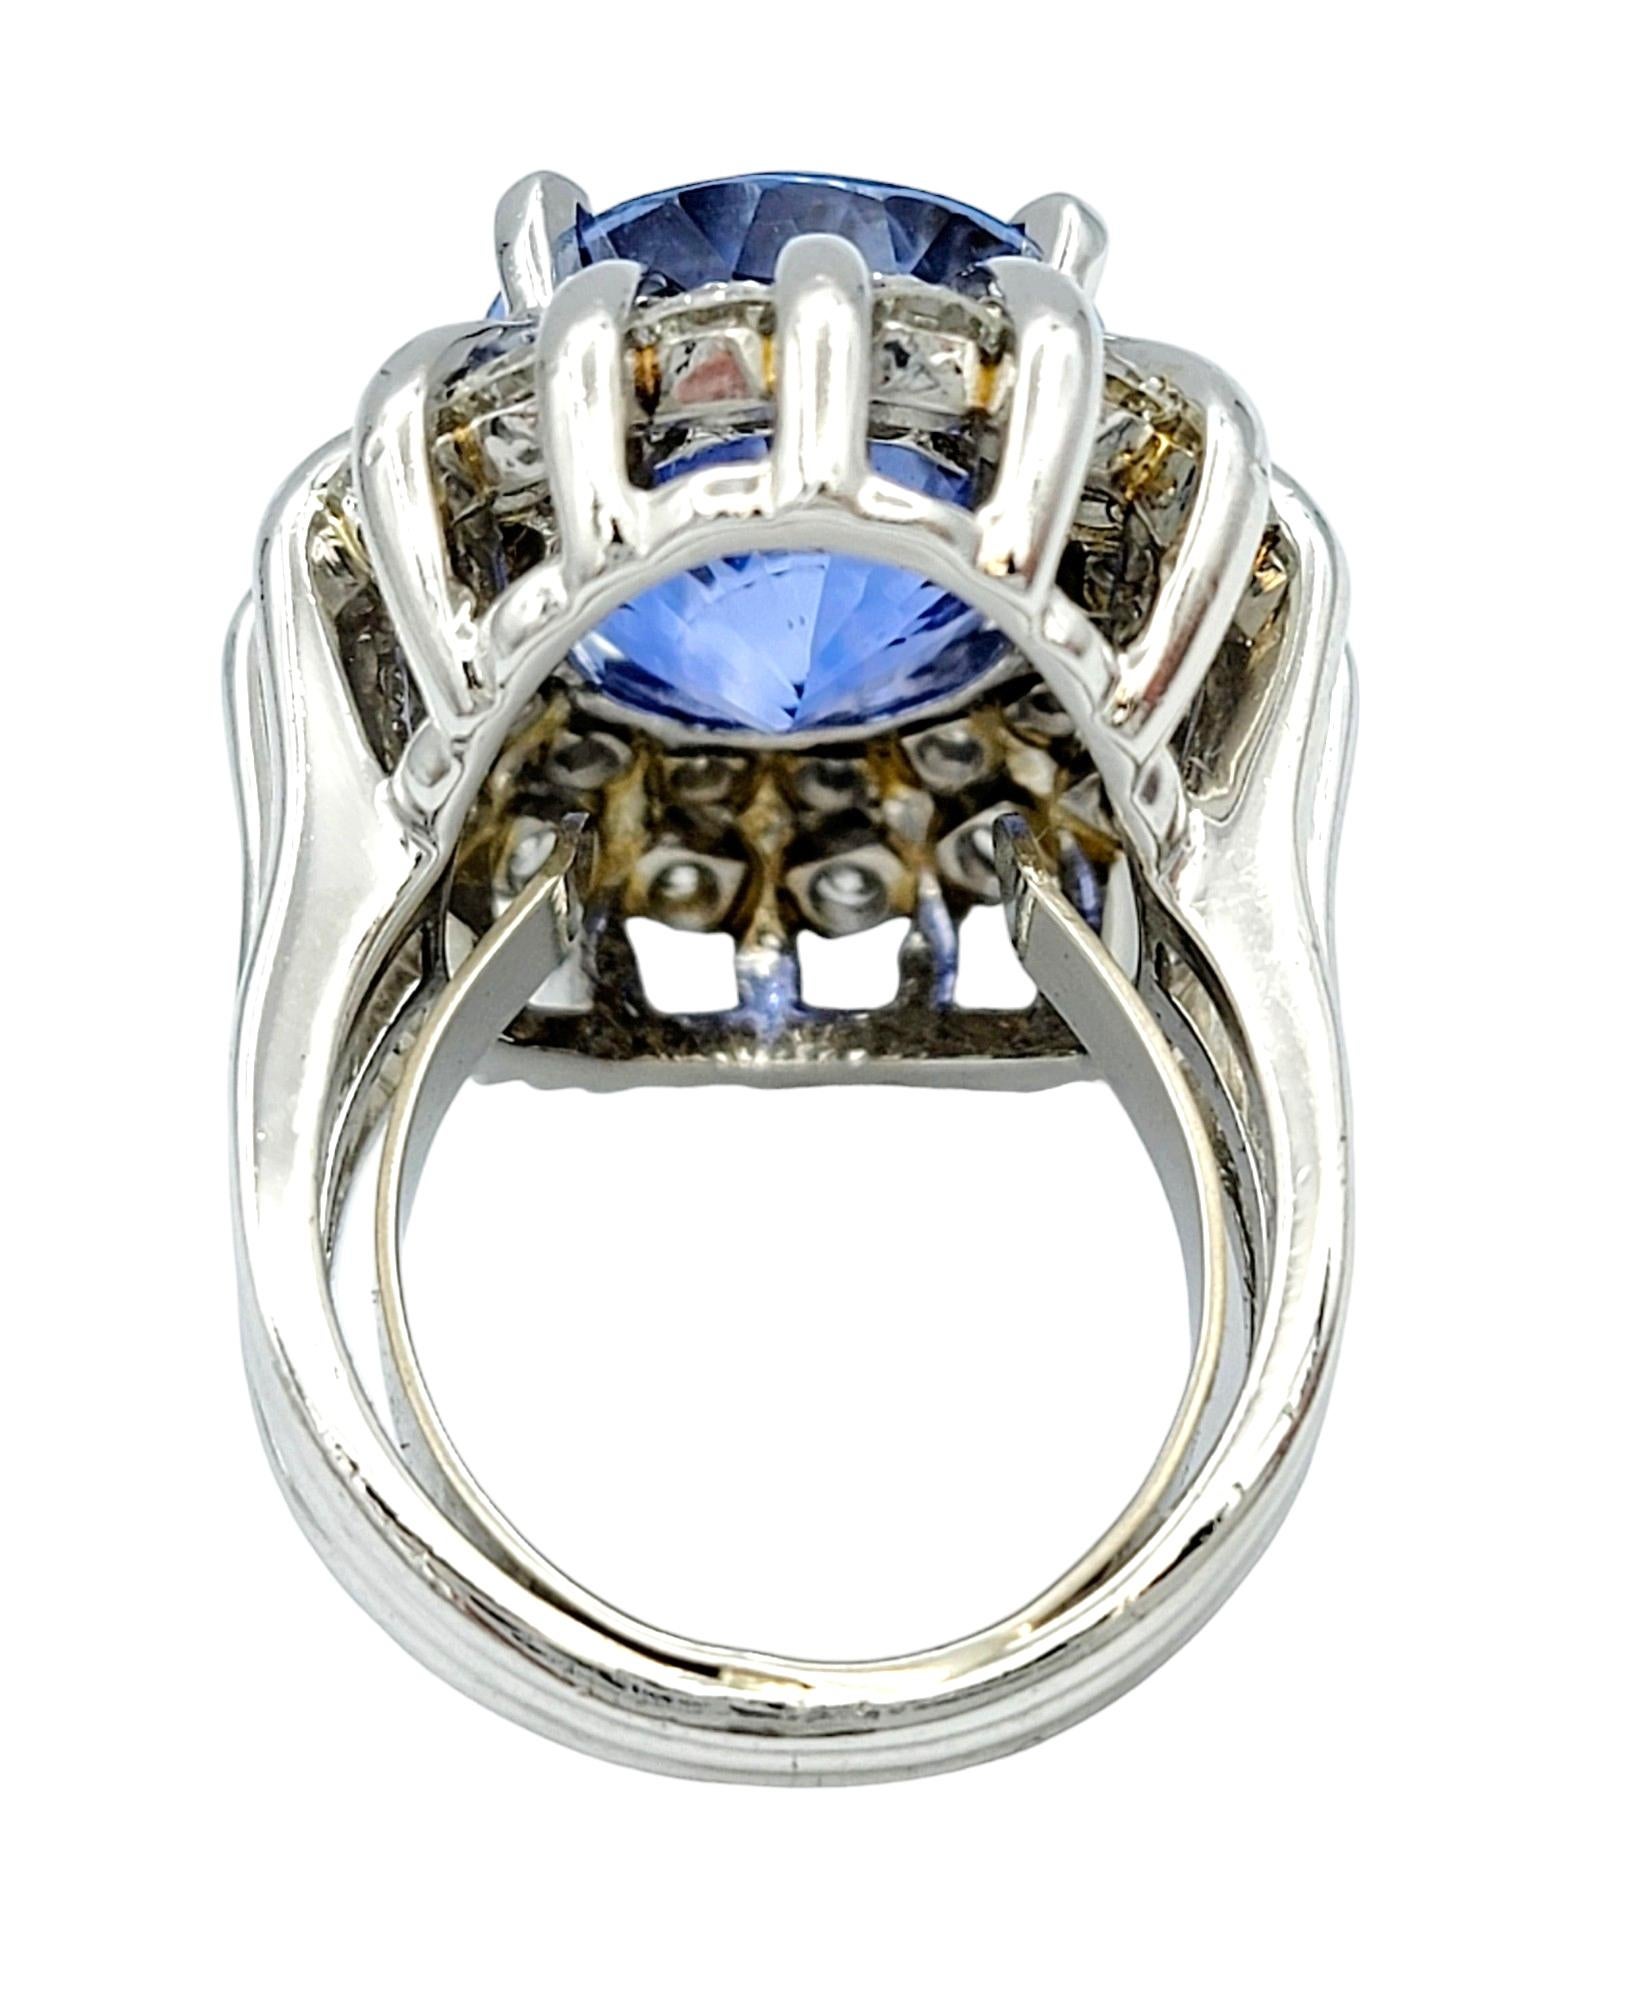 Rare Untreated 16.27 Carat Oval Cut Ceylon Sapphire and Double Diamond Halo Ring For Sale 2